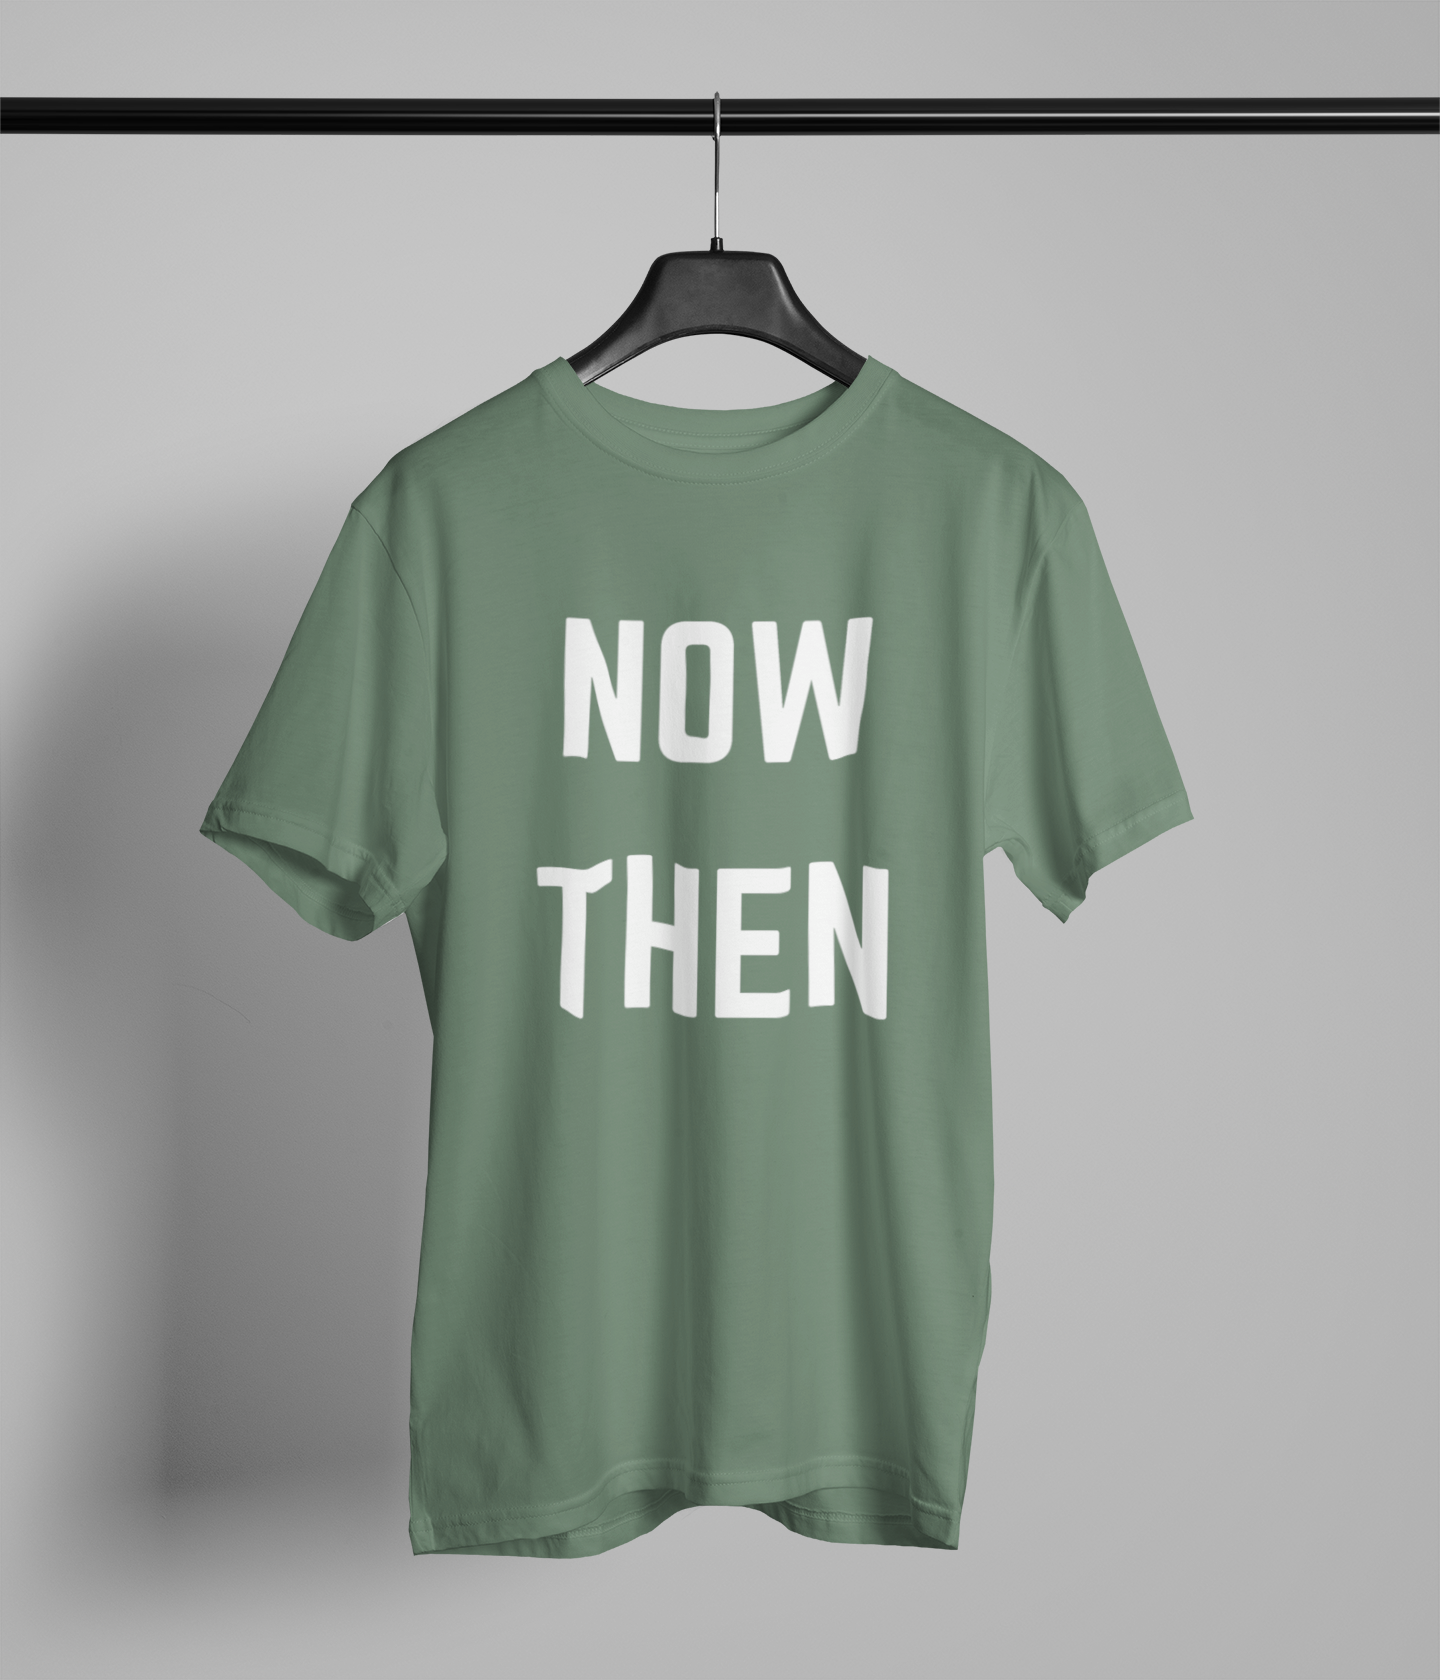 NOW THEN Northern Slang T-Shirt Unisex